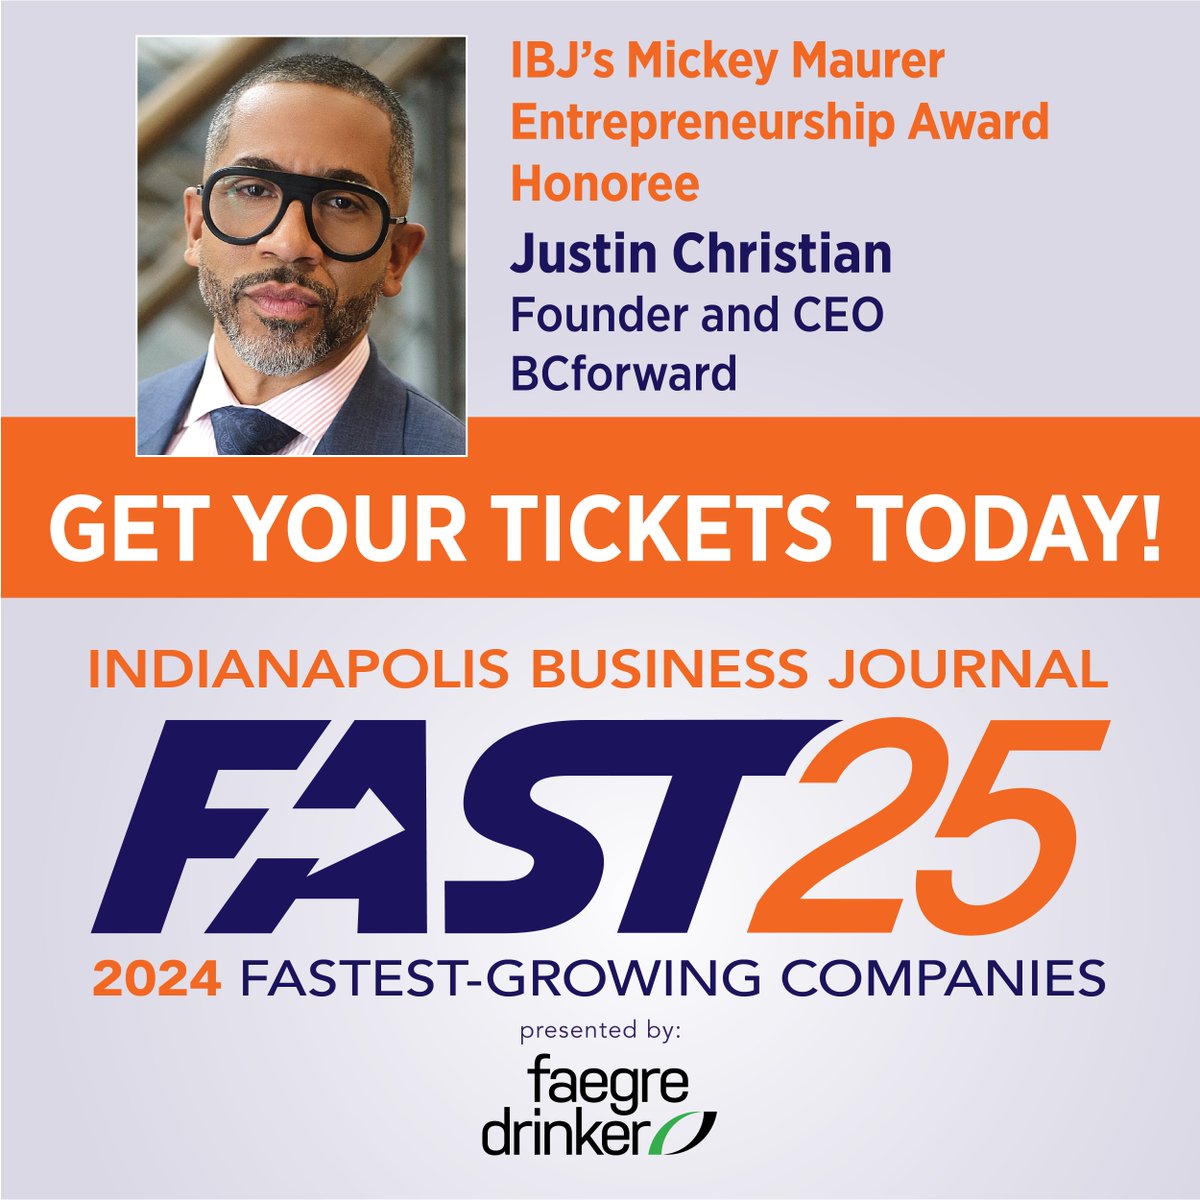 Our Fast 25 event on May 14 will unveil the exclusive ranking of the fastest-growing privately held companies. This event includes our IBJ Mickey Maurer Entrepreneurship Award which will honor Justin Christian, founder and CEO of BCforward. Click here: ibj.com/events/2024/fa…